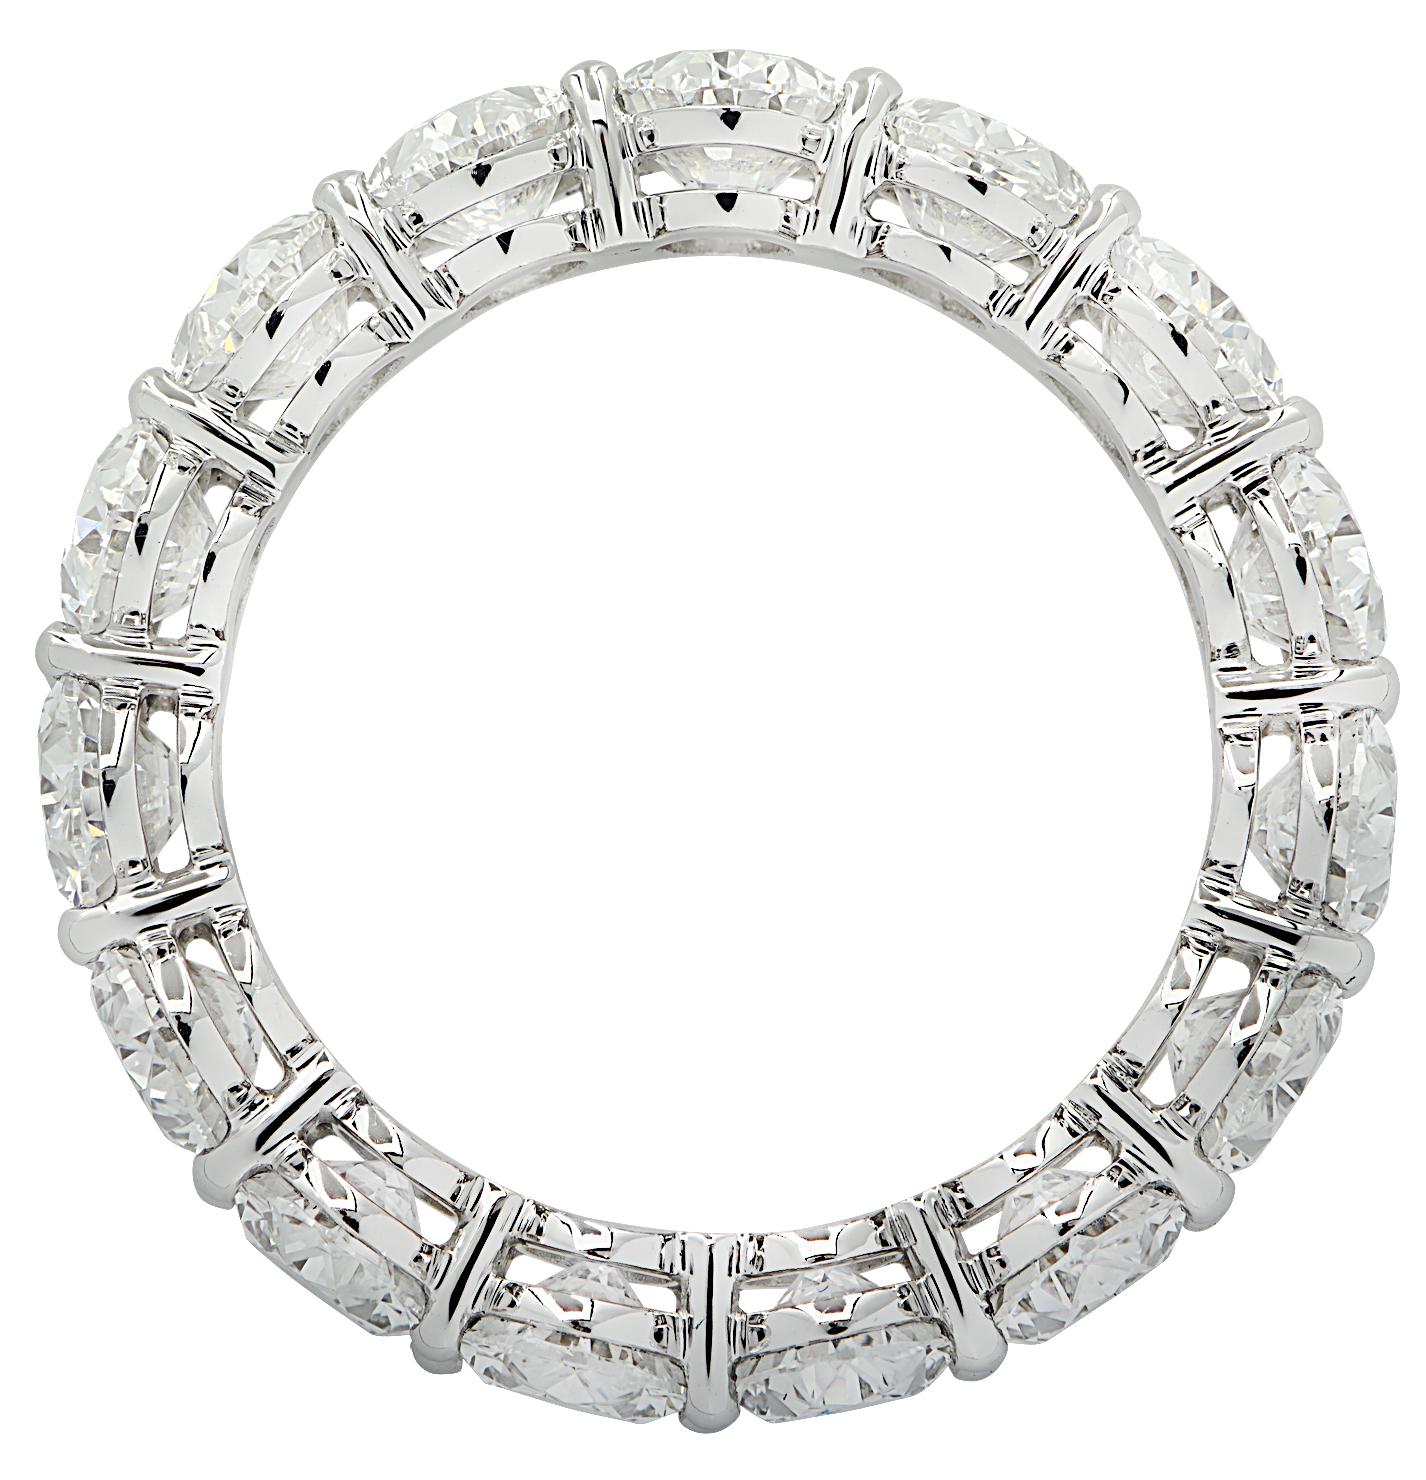 Exquisite Vivid Diamonds eternity band crafted in Platinum, showcasing 14 GIA Certified round brilliant cut diamonds weighing 5.60 carats total, D-F color, VVS-VS clarity. Each diamond was carefully selected, perfectly matched and set in a seamless